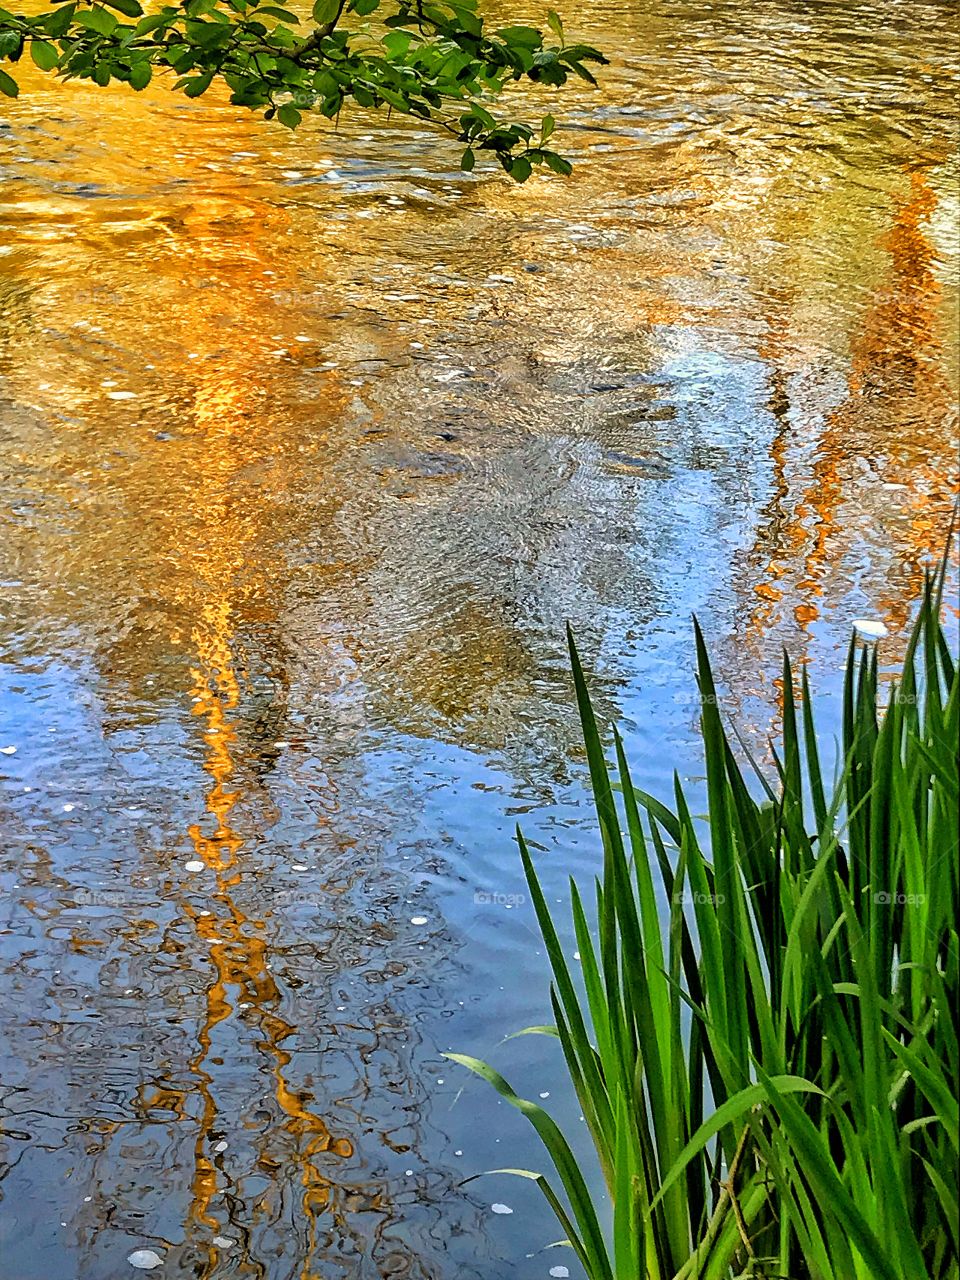 Reflections on a creek